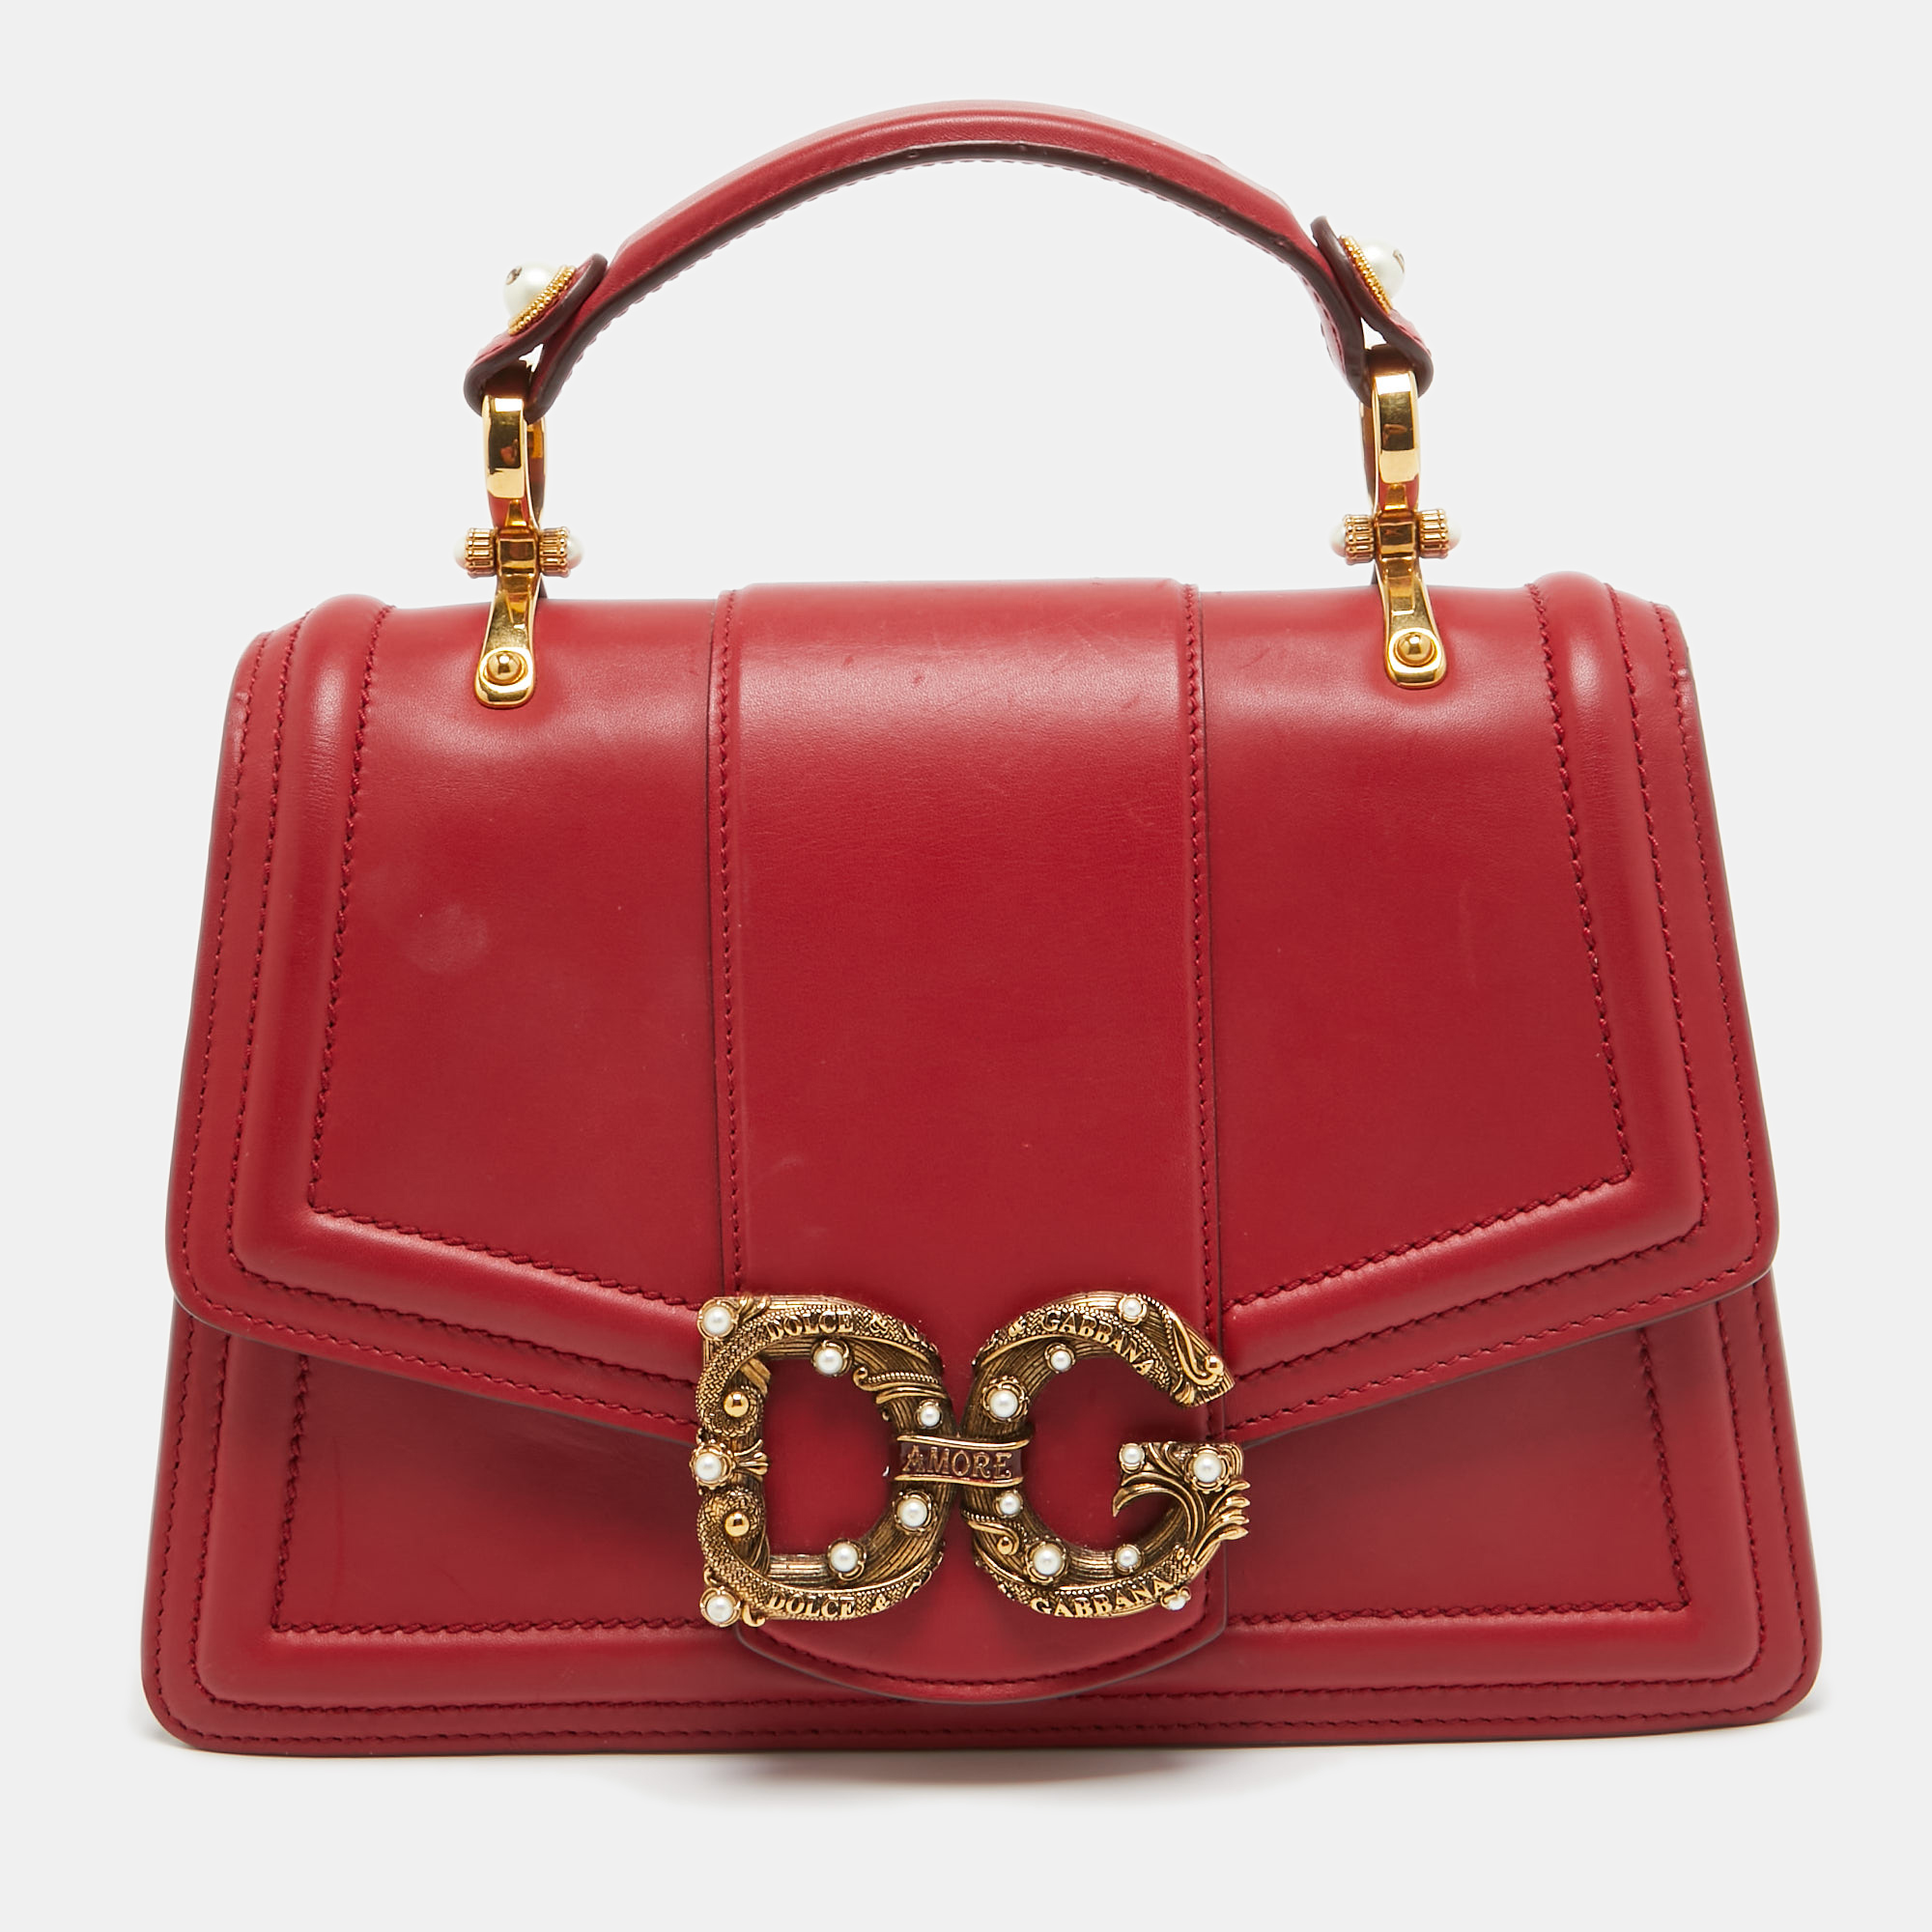 

Dolce & Gabbana Red Leather DG Amore Top Handle Bag